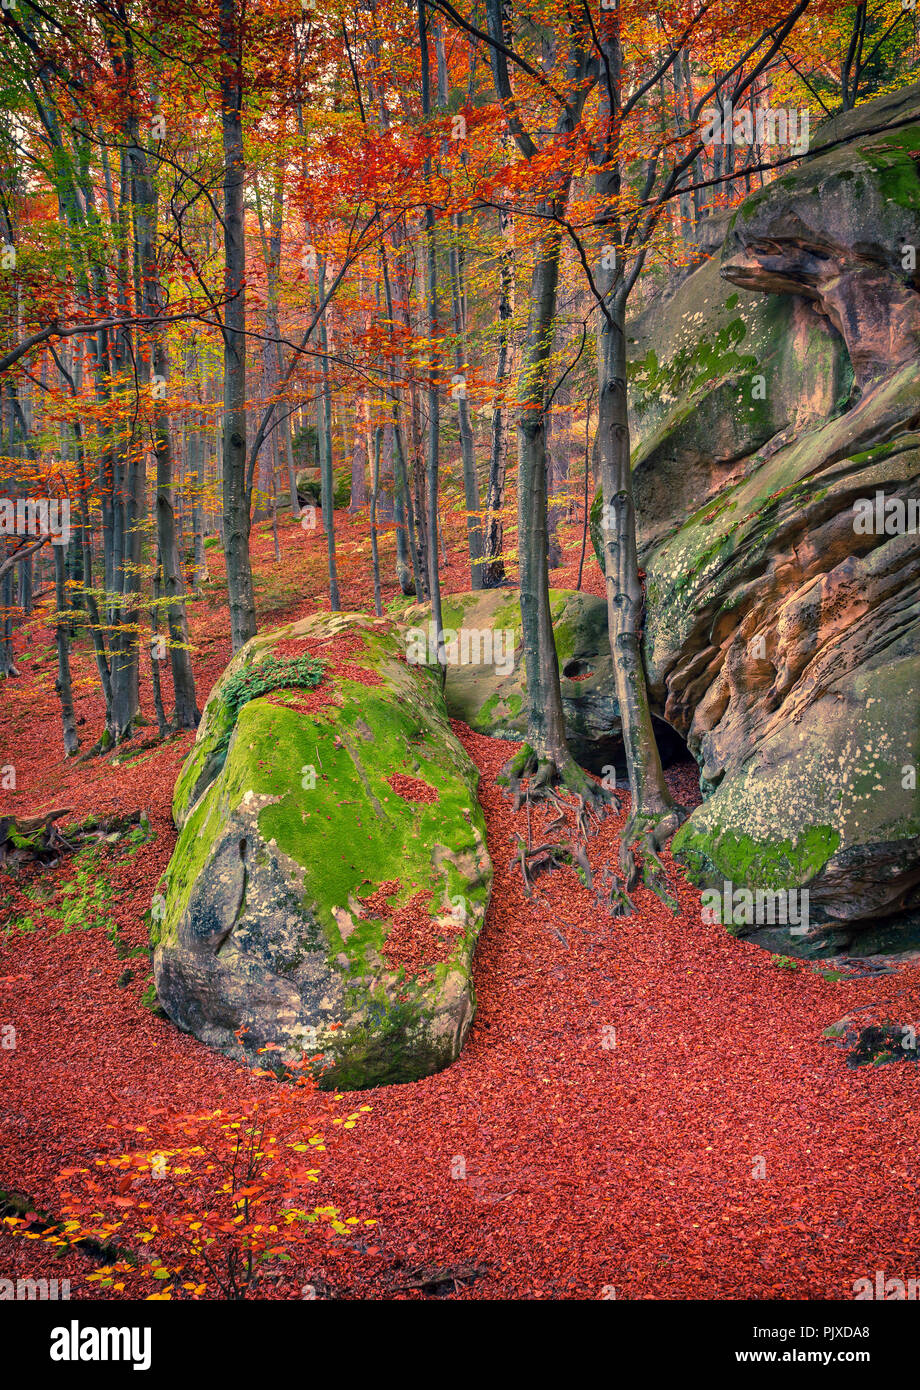 Huge rock in the autumn forest. Retro style. Stock Photo